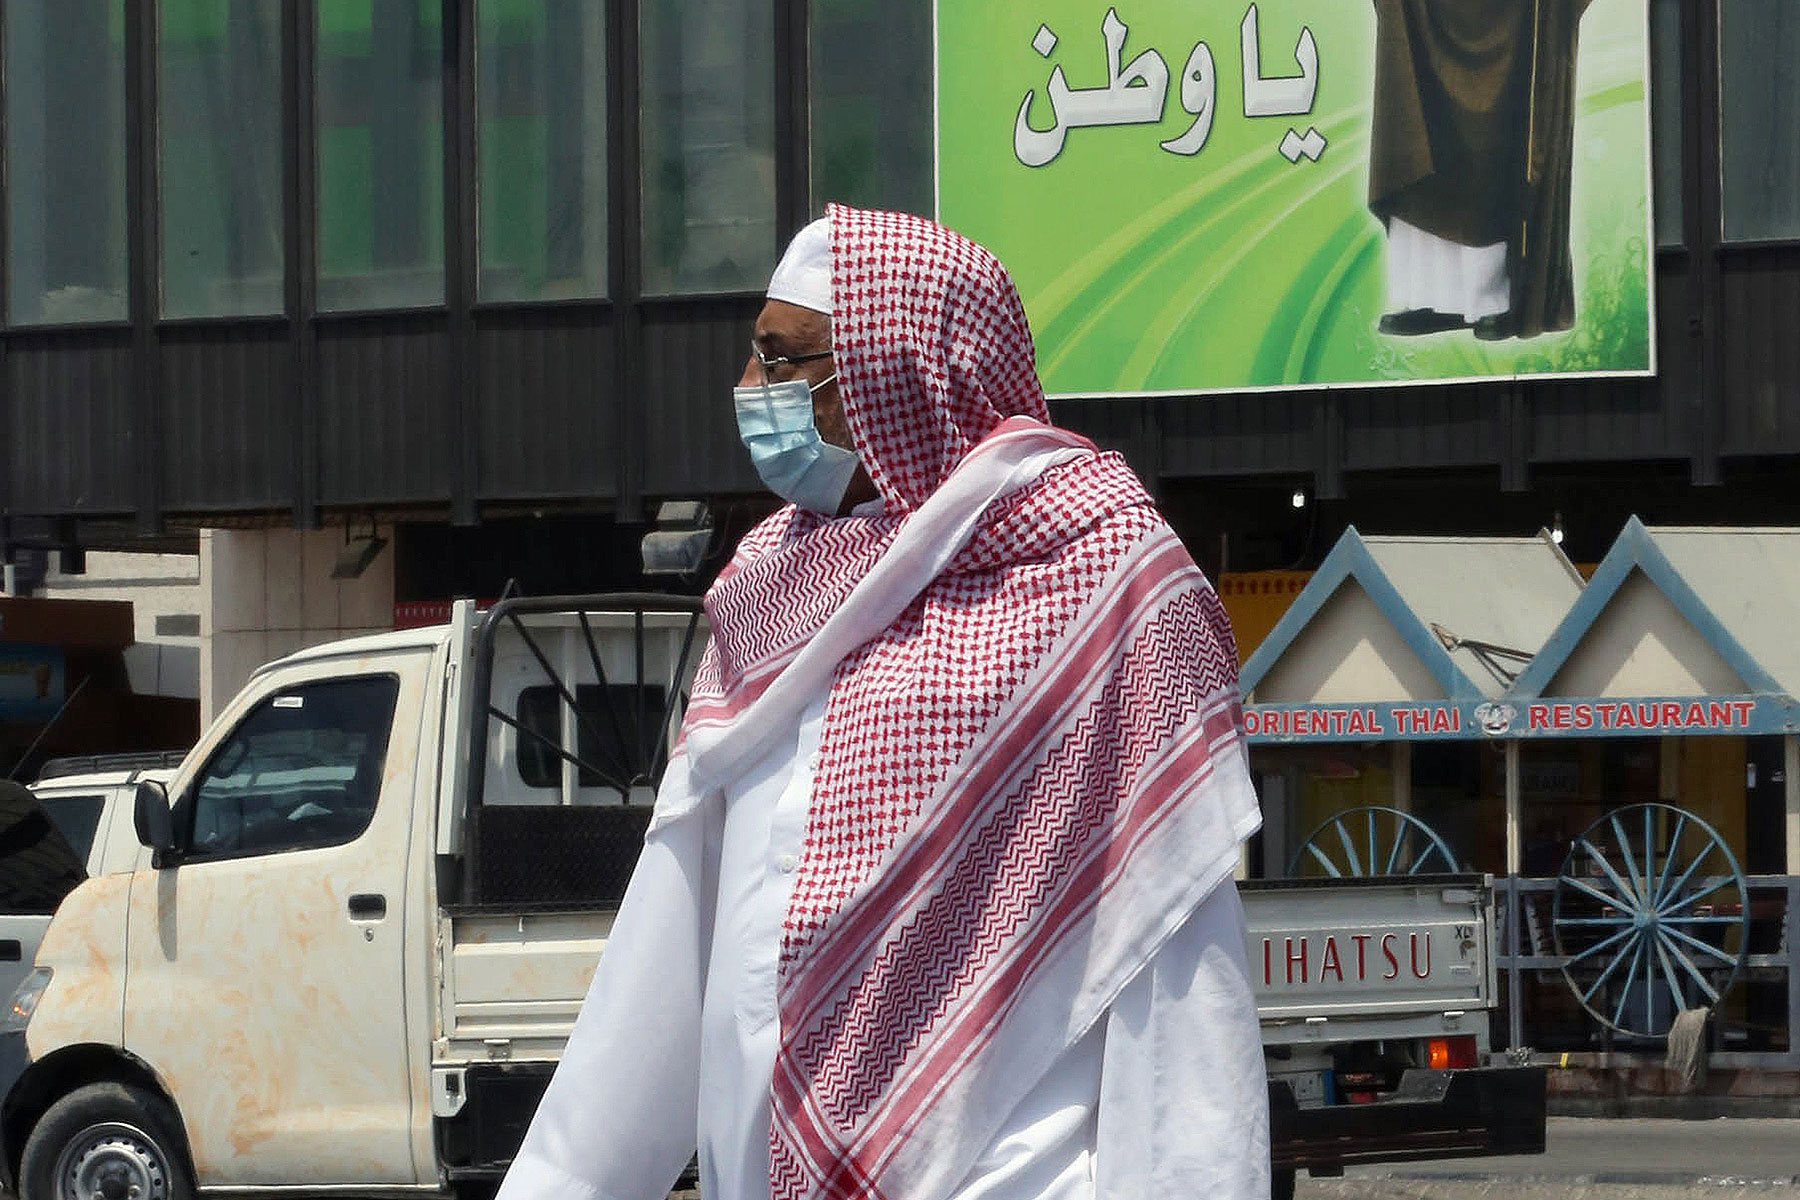 A Saudi man wears a mouth and nose mask as he walks in a street of the Red Sea coastal city of Jeddah on April 27, 2014 (AFP/Getty Images)